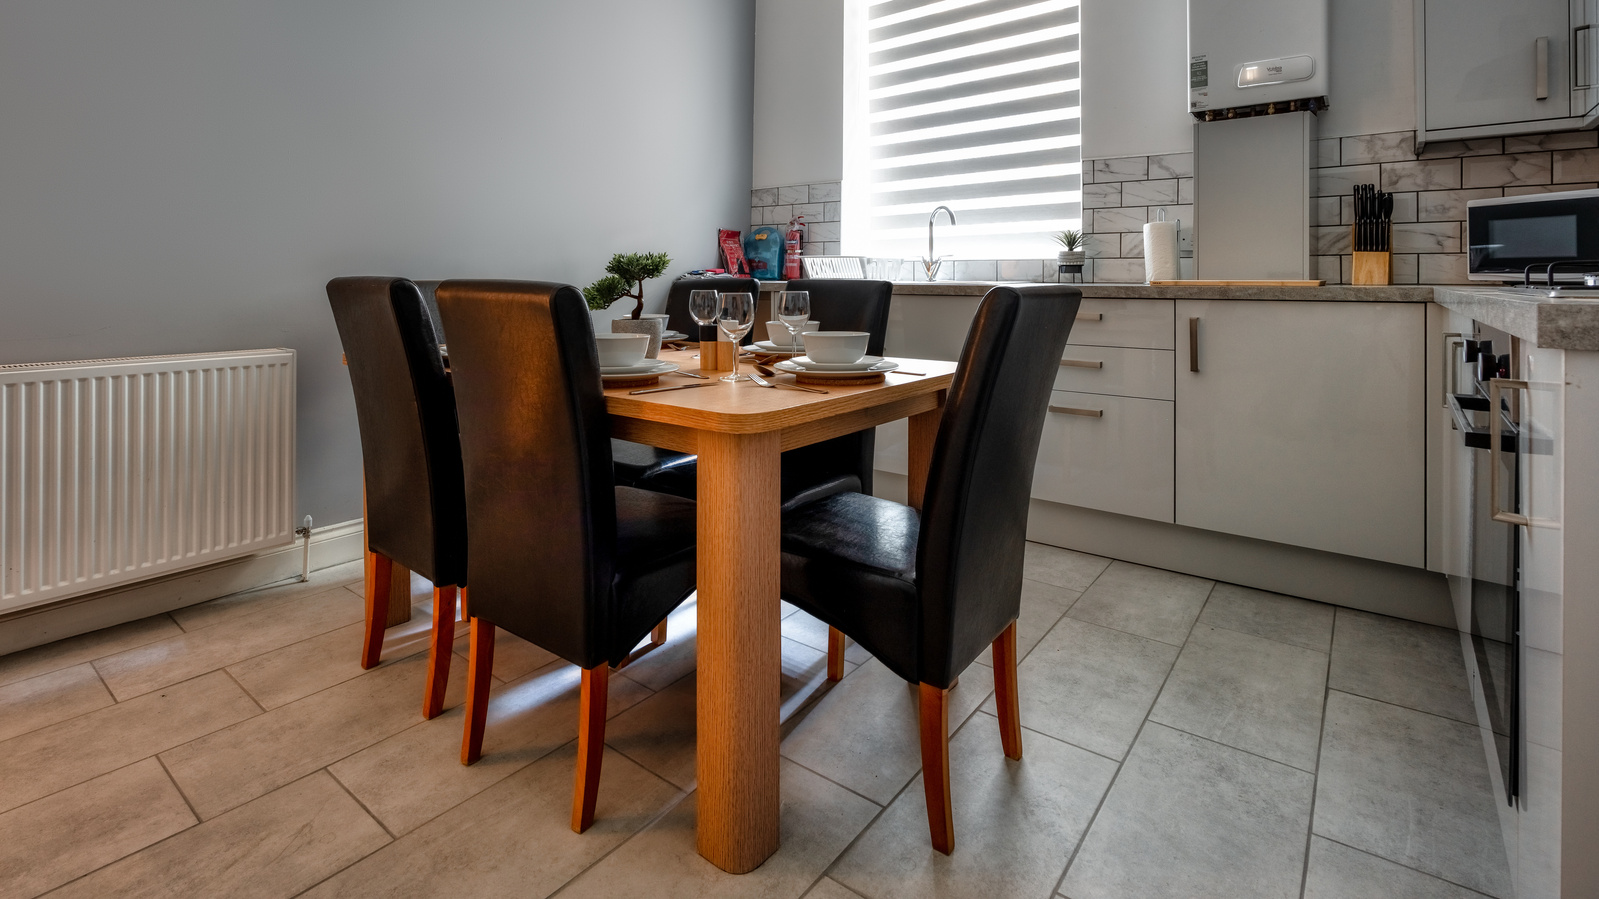 Dining Room for Scotland Interior Property in Glasgow - Photography by Nate Cleary